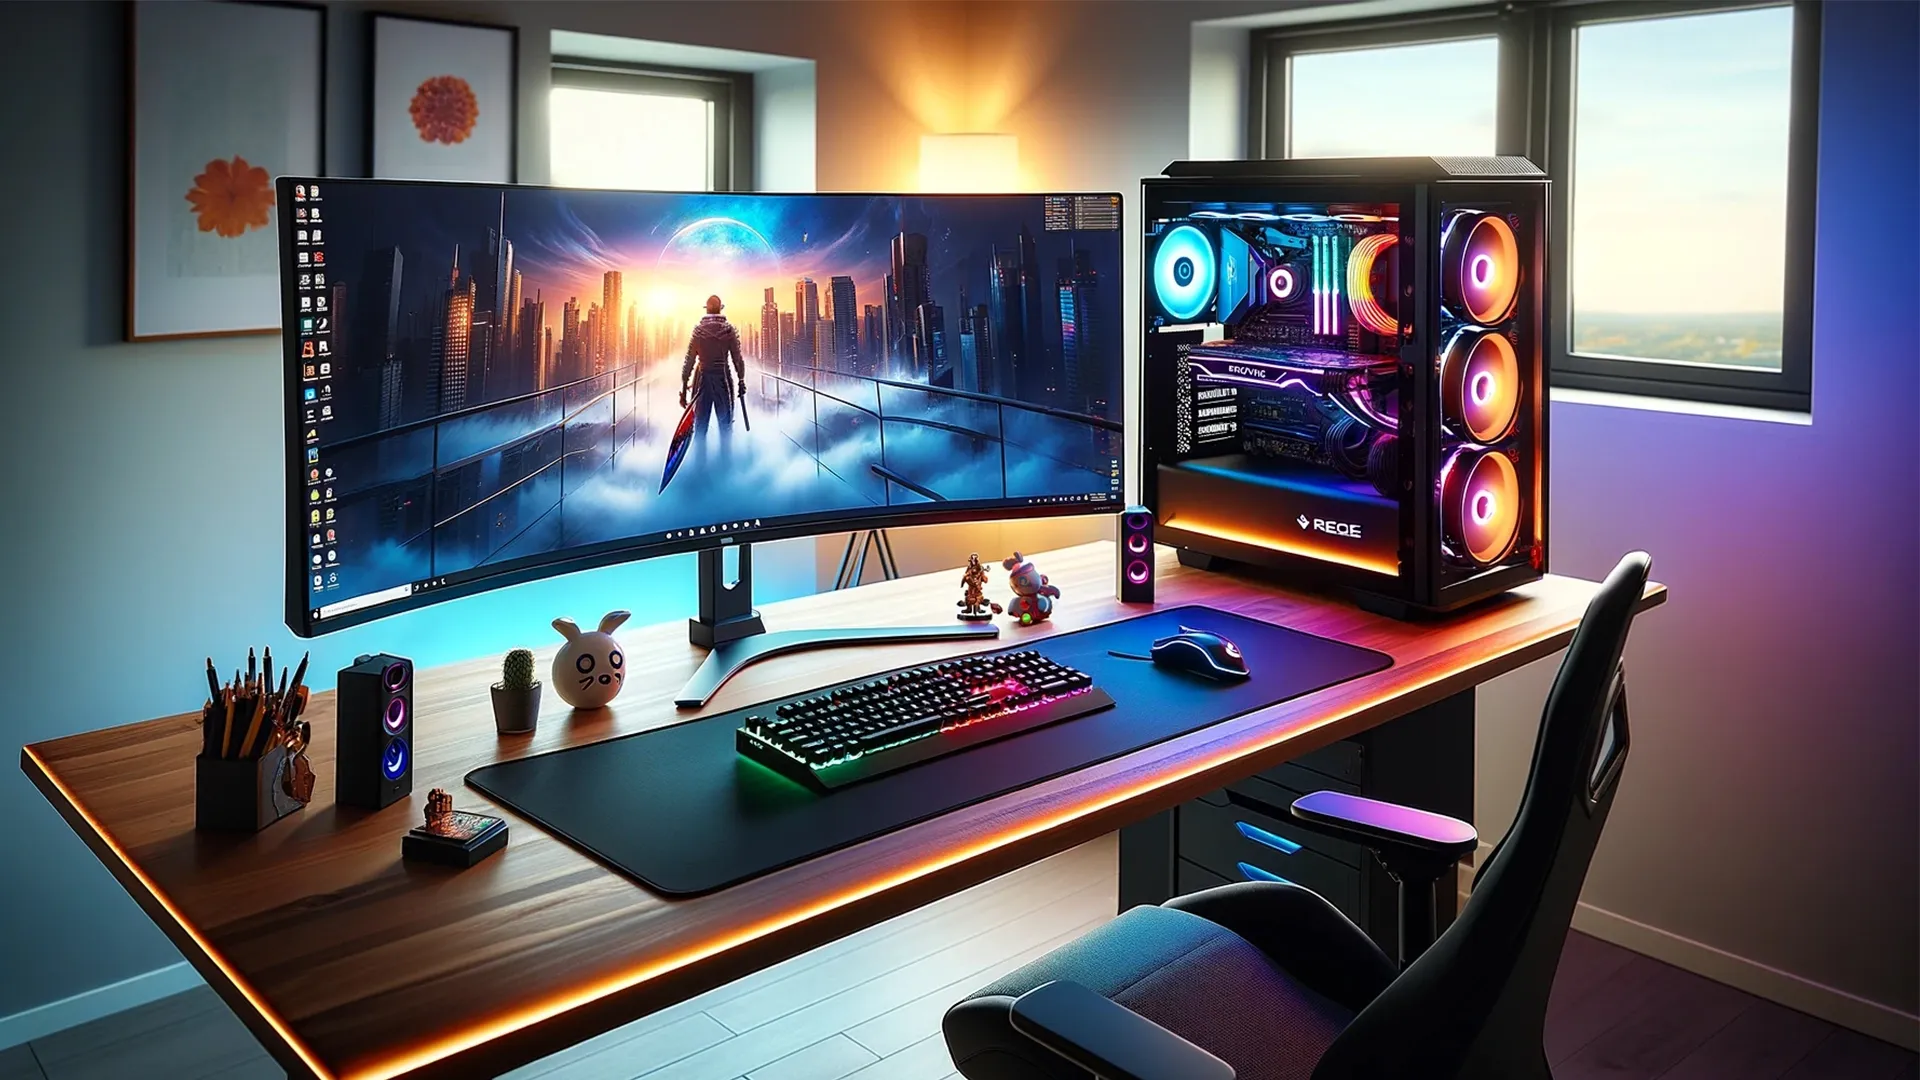 A glowing gaming PC with three front LED fans, and glass case sits next to an ultra-wide monitor on top of a walnut standing desk. This image was AI generated.